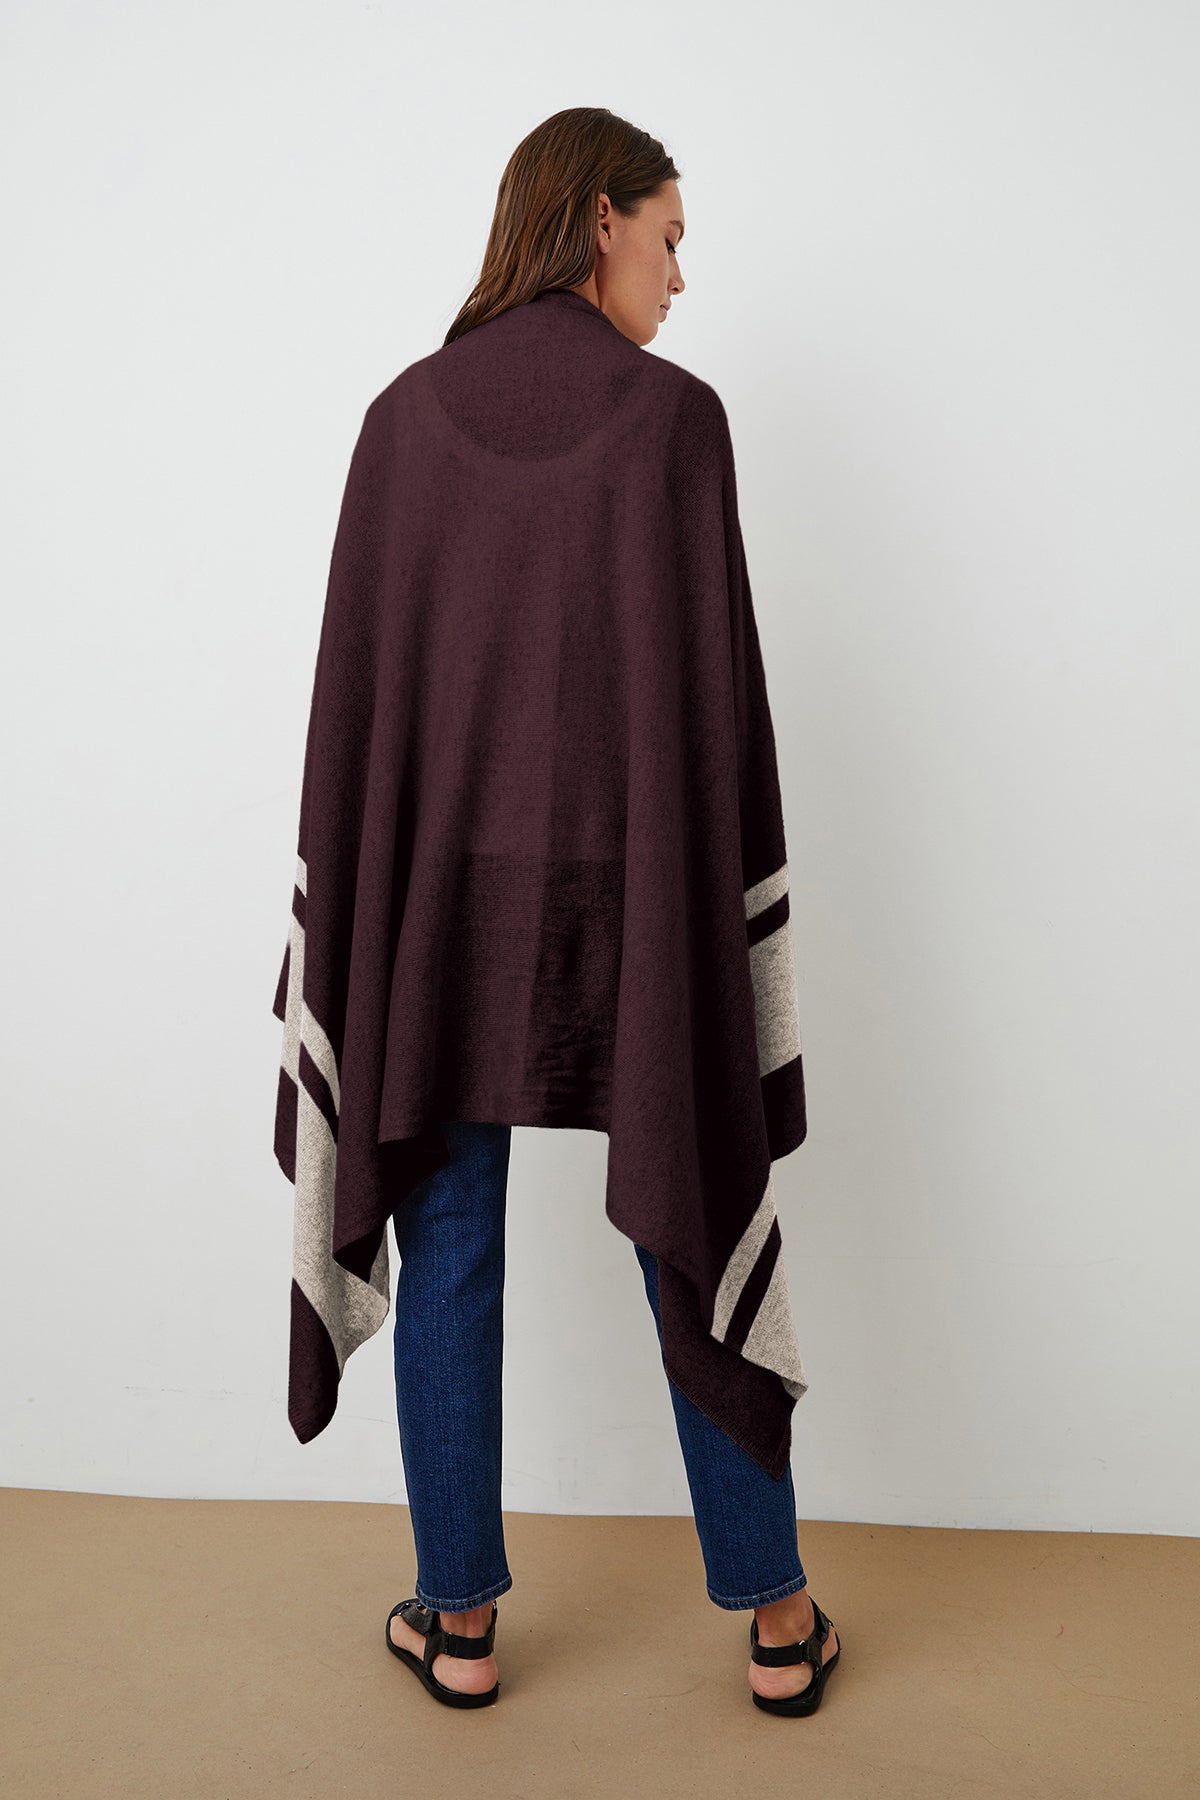 The back view of a woman wearing a Jenny Graham Home LIV CASHMERE THROW BLANKET poncho.-15274892525761